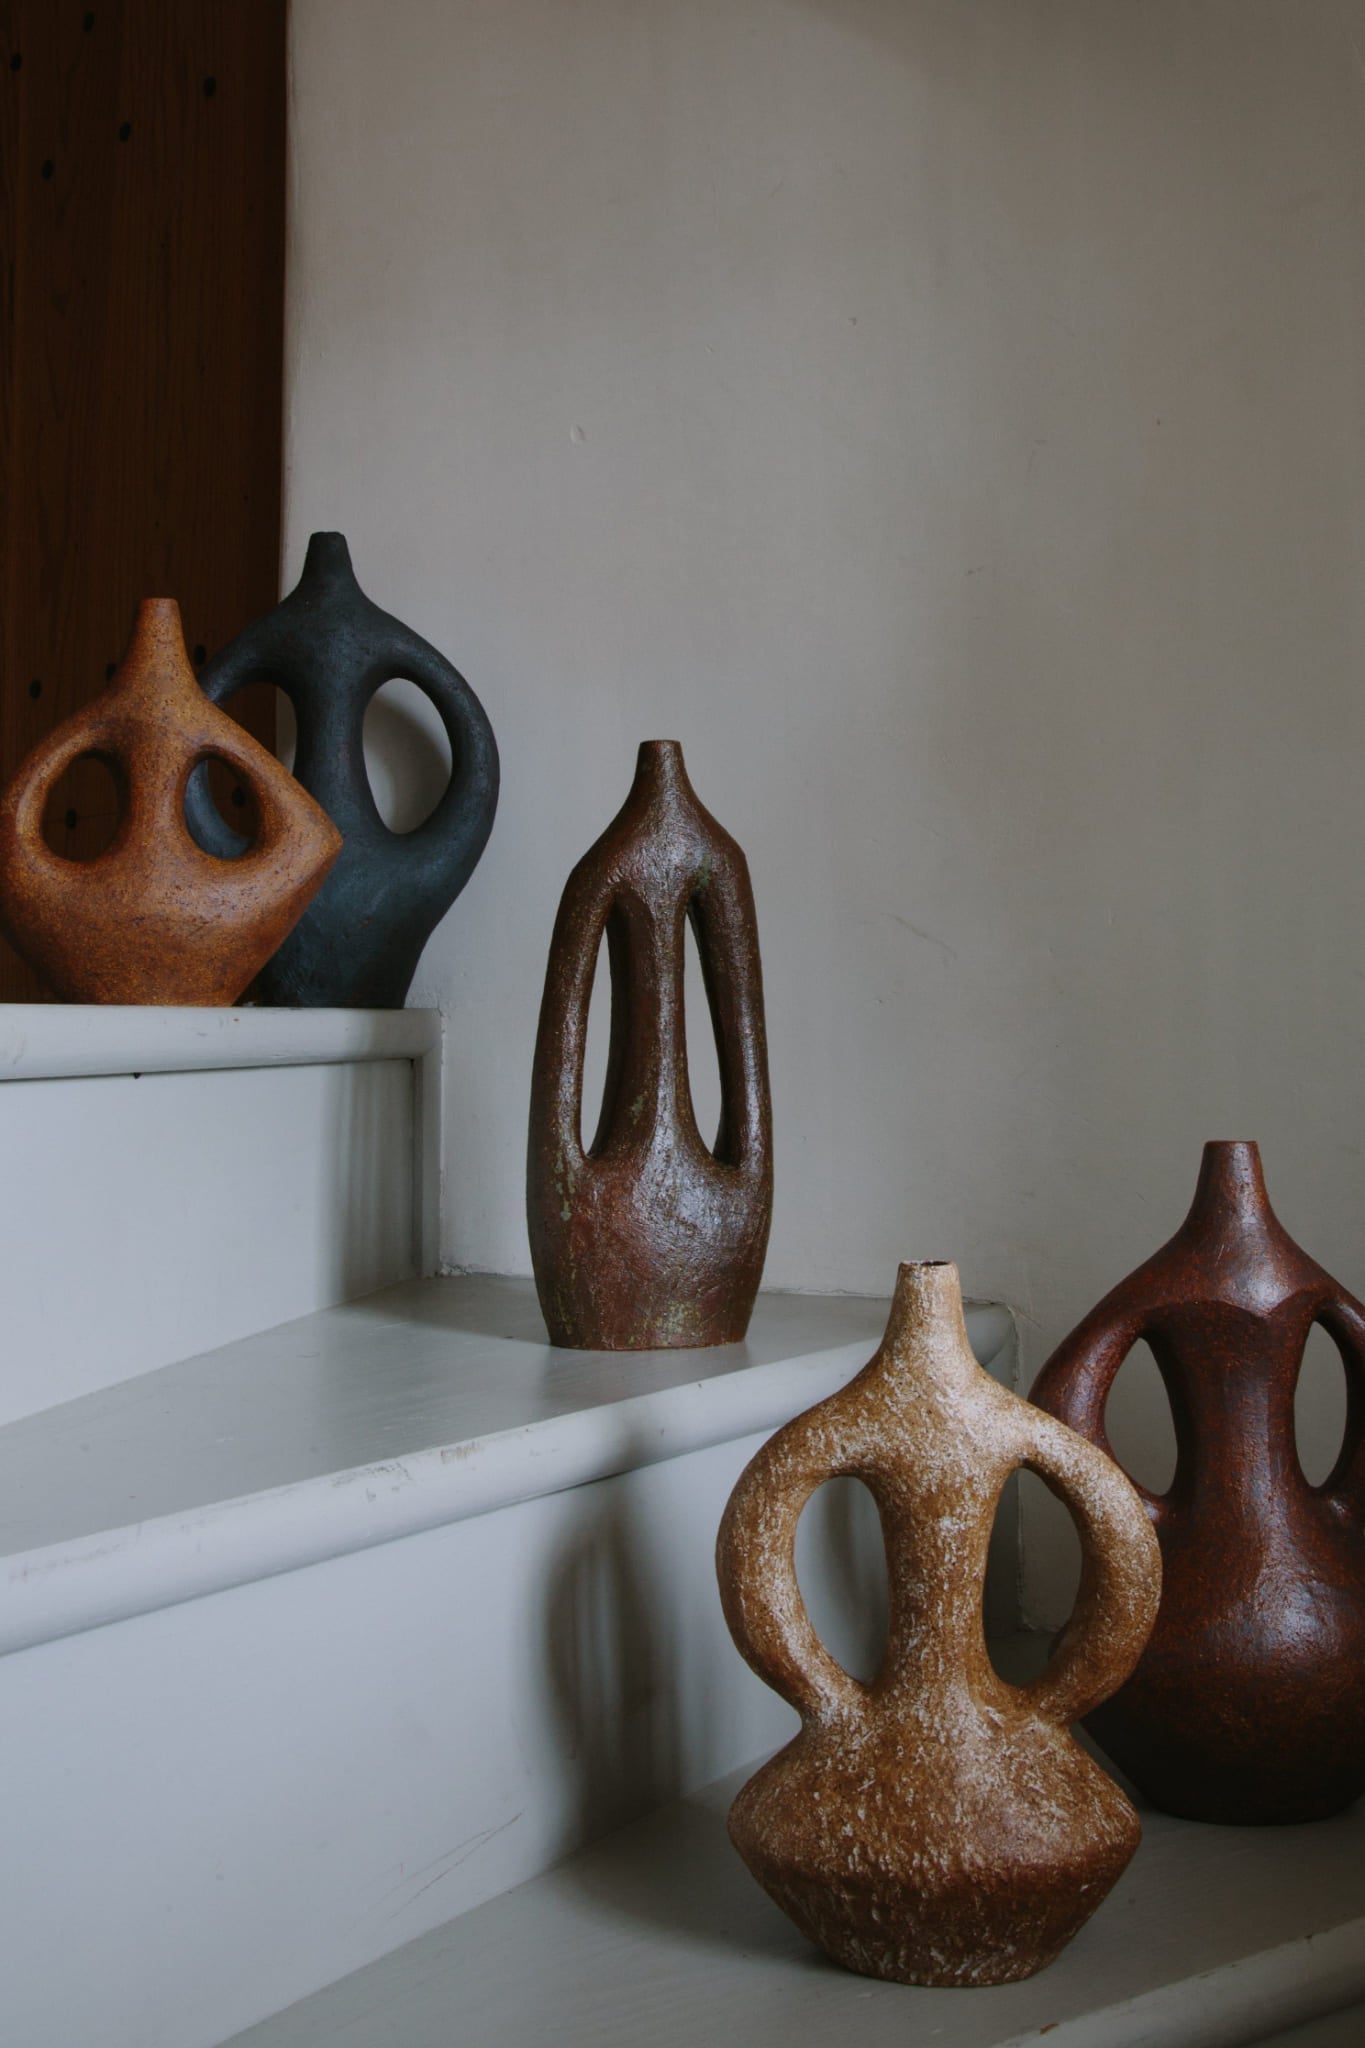 A series of five stoneware coil built vases by Viv Lee. Each with two handles, in a variety of figurative forms and deep earth toned clays and glazes.